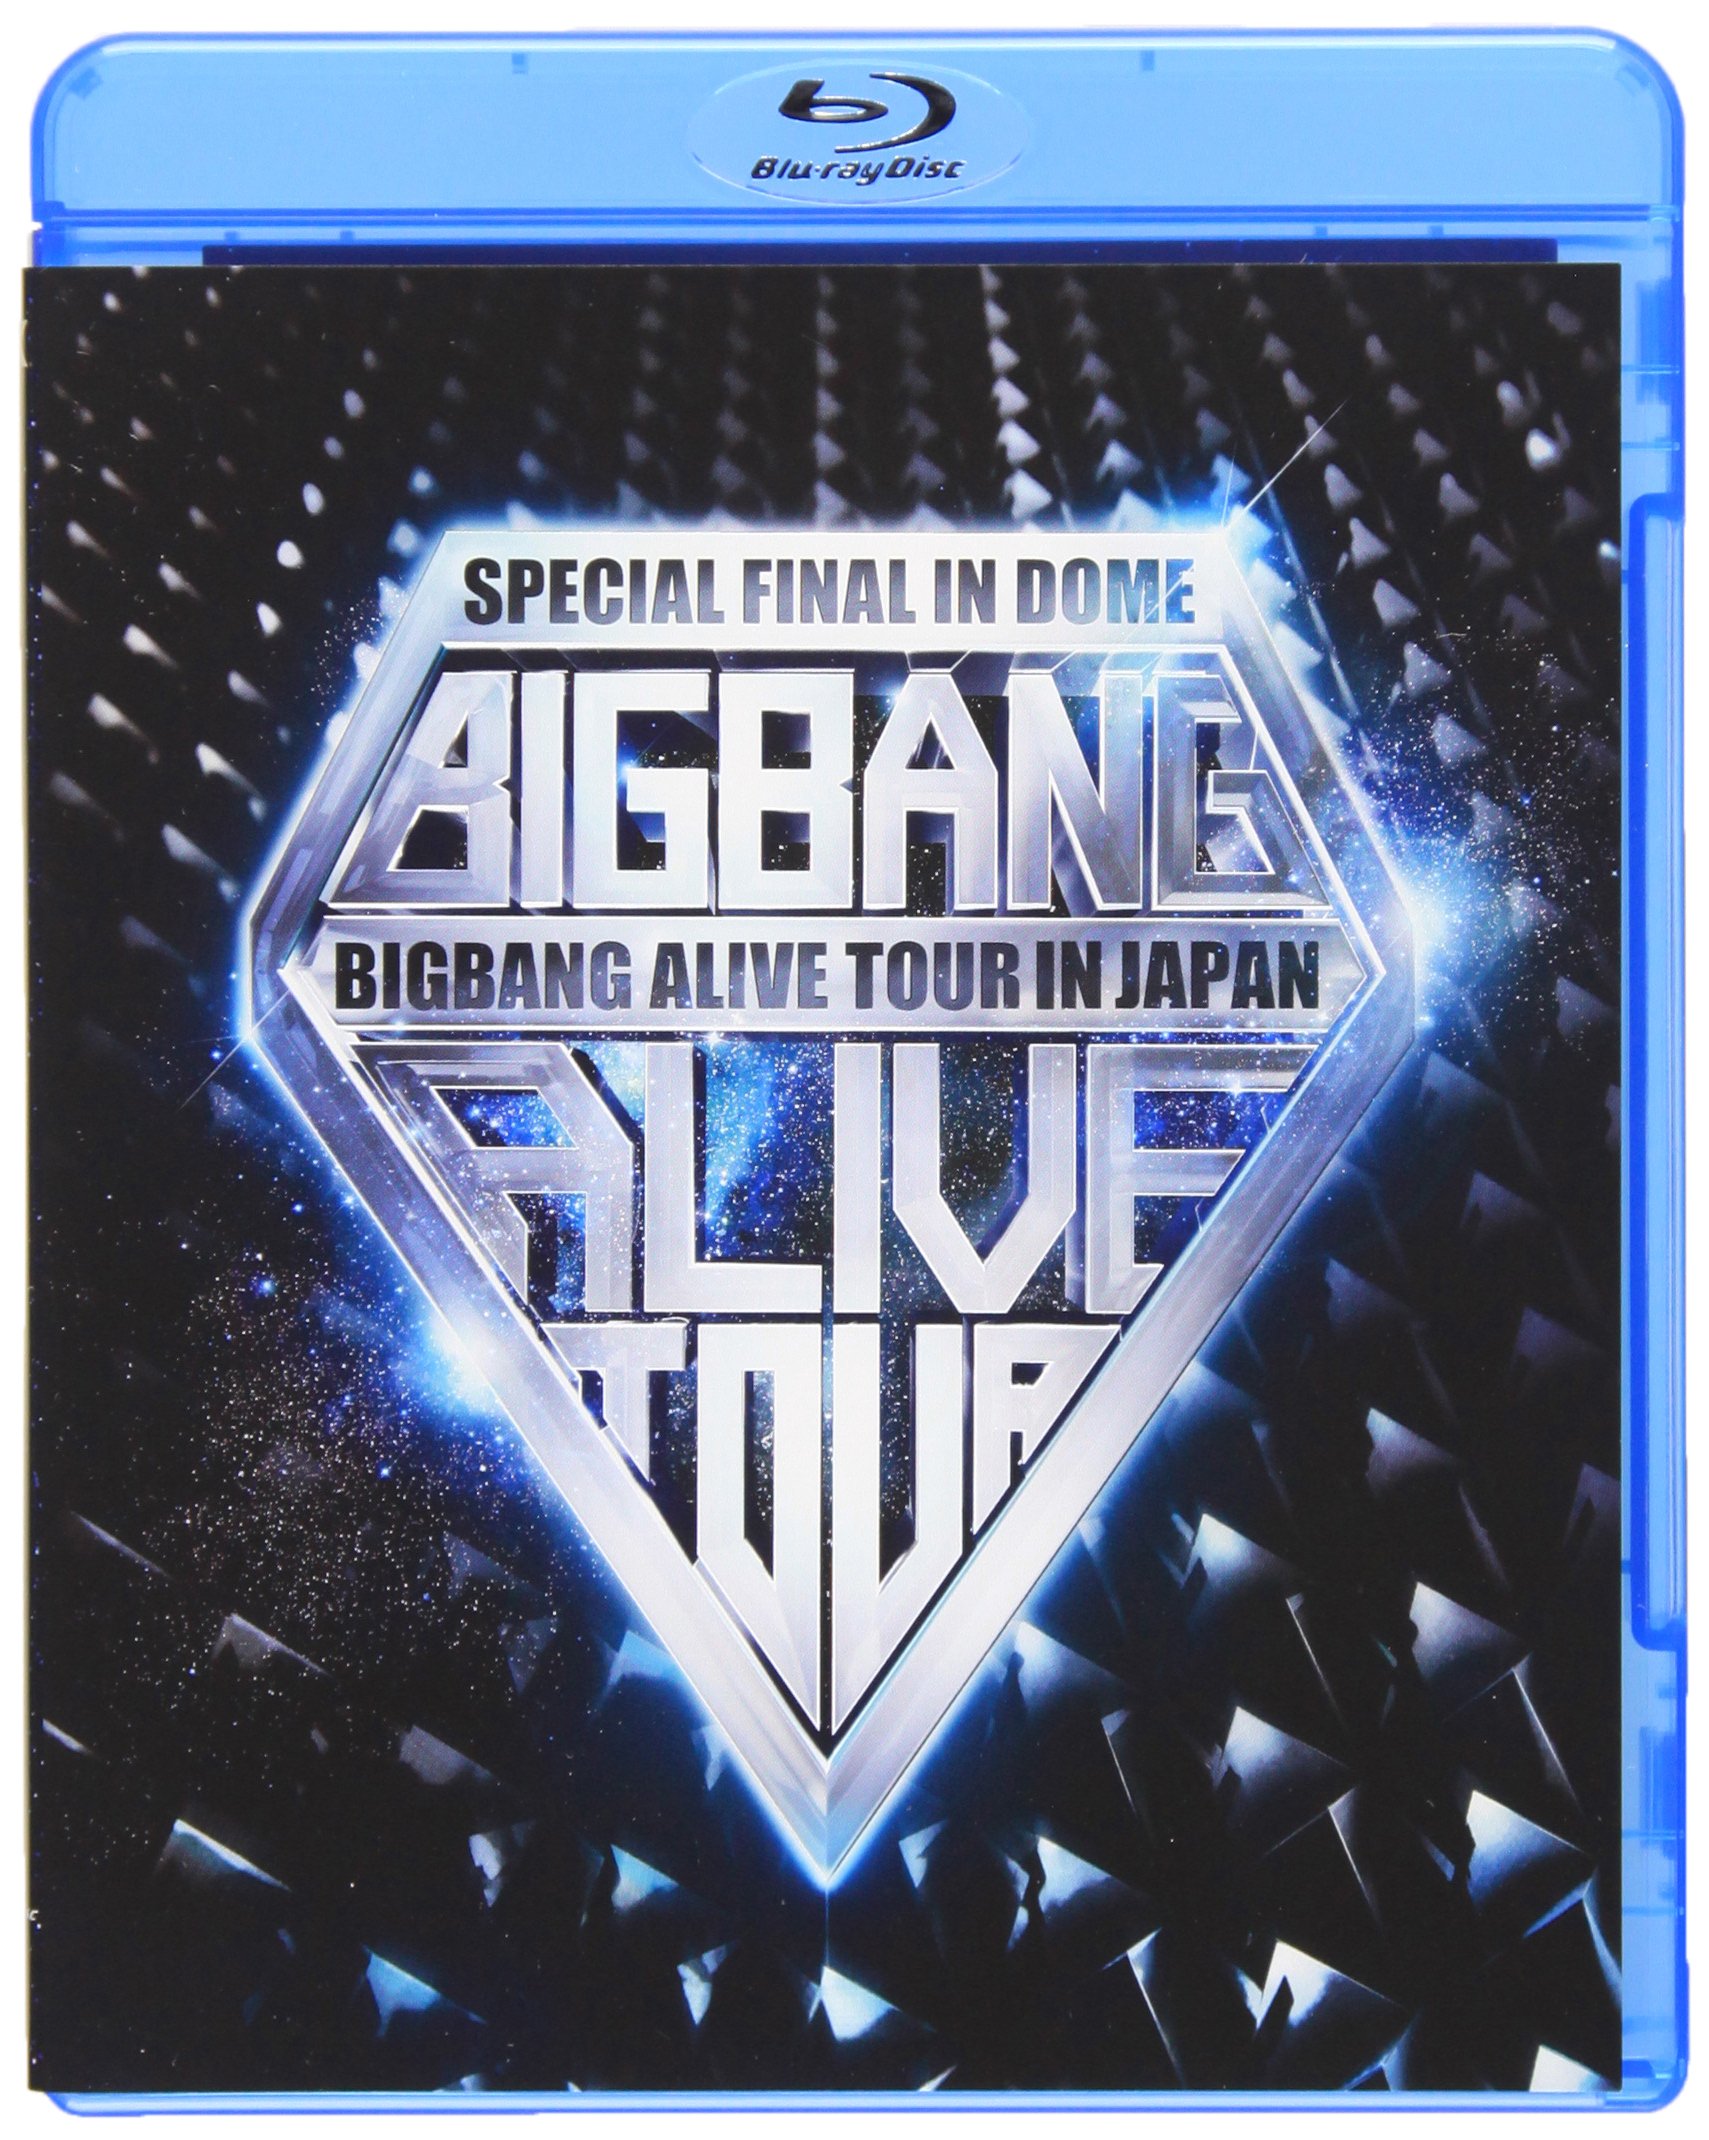 BIGBANG ALIVE TOUR 2012 IN JAPAN SPECIAL FINAL IN DOME -TOKYO DOME 2012.12.05- (Blu-ray Disc)